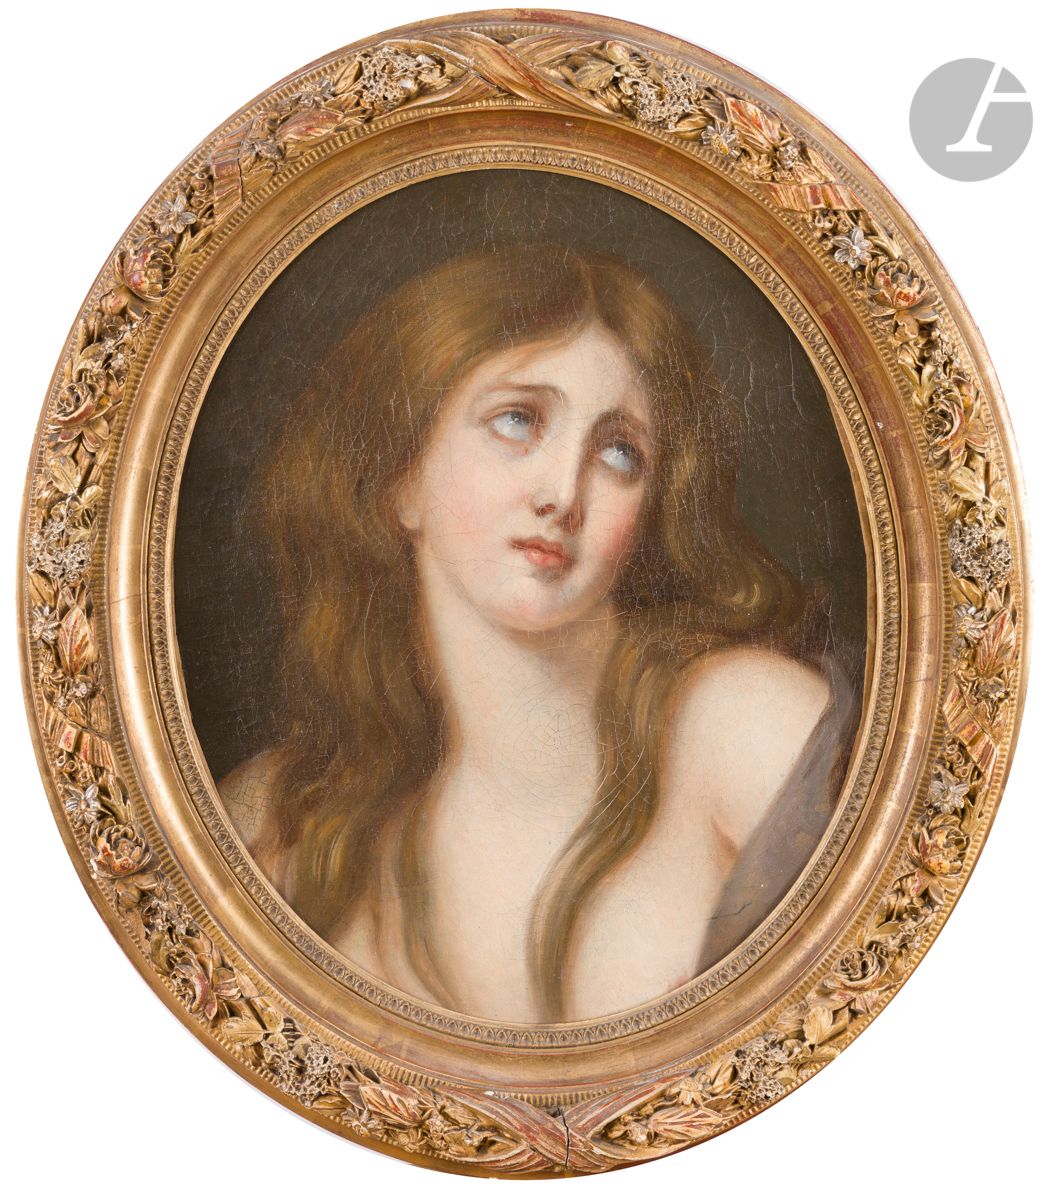 Null Attributed to Jean-Baptiste GREUZE (1725-1805)
Mary Magdalene
Original oval&hellip;